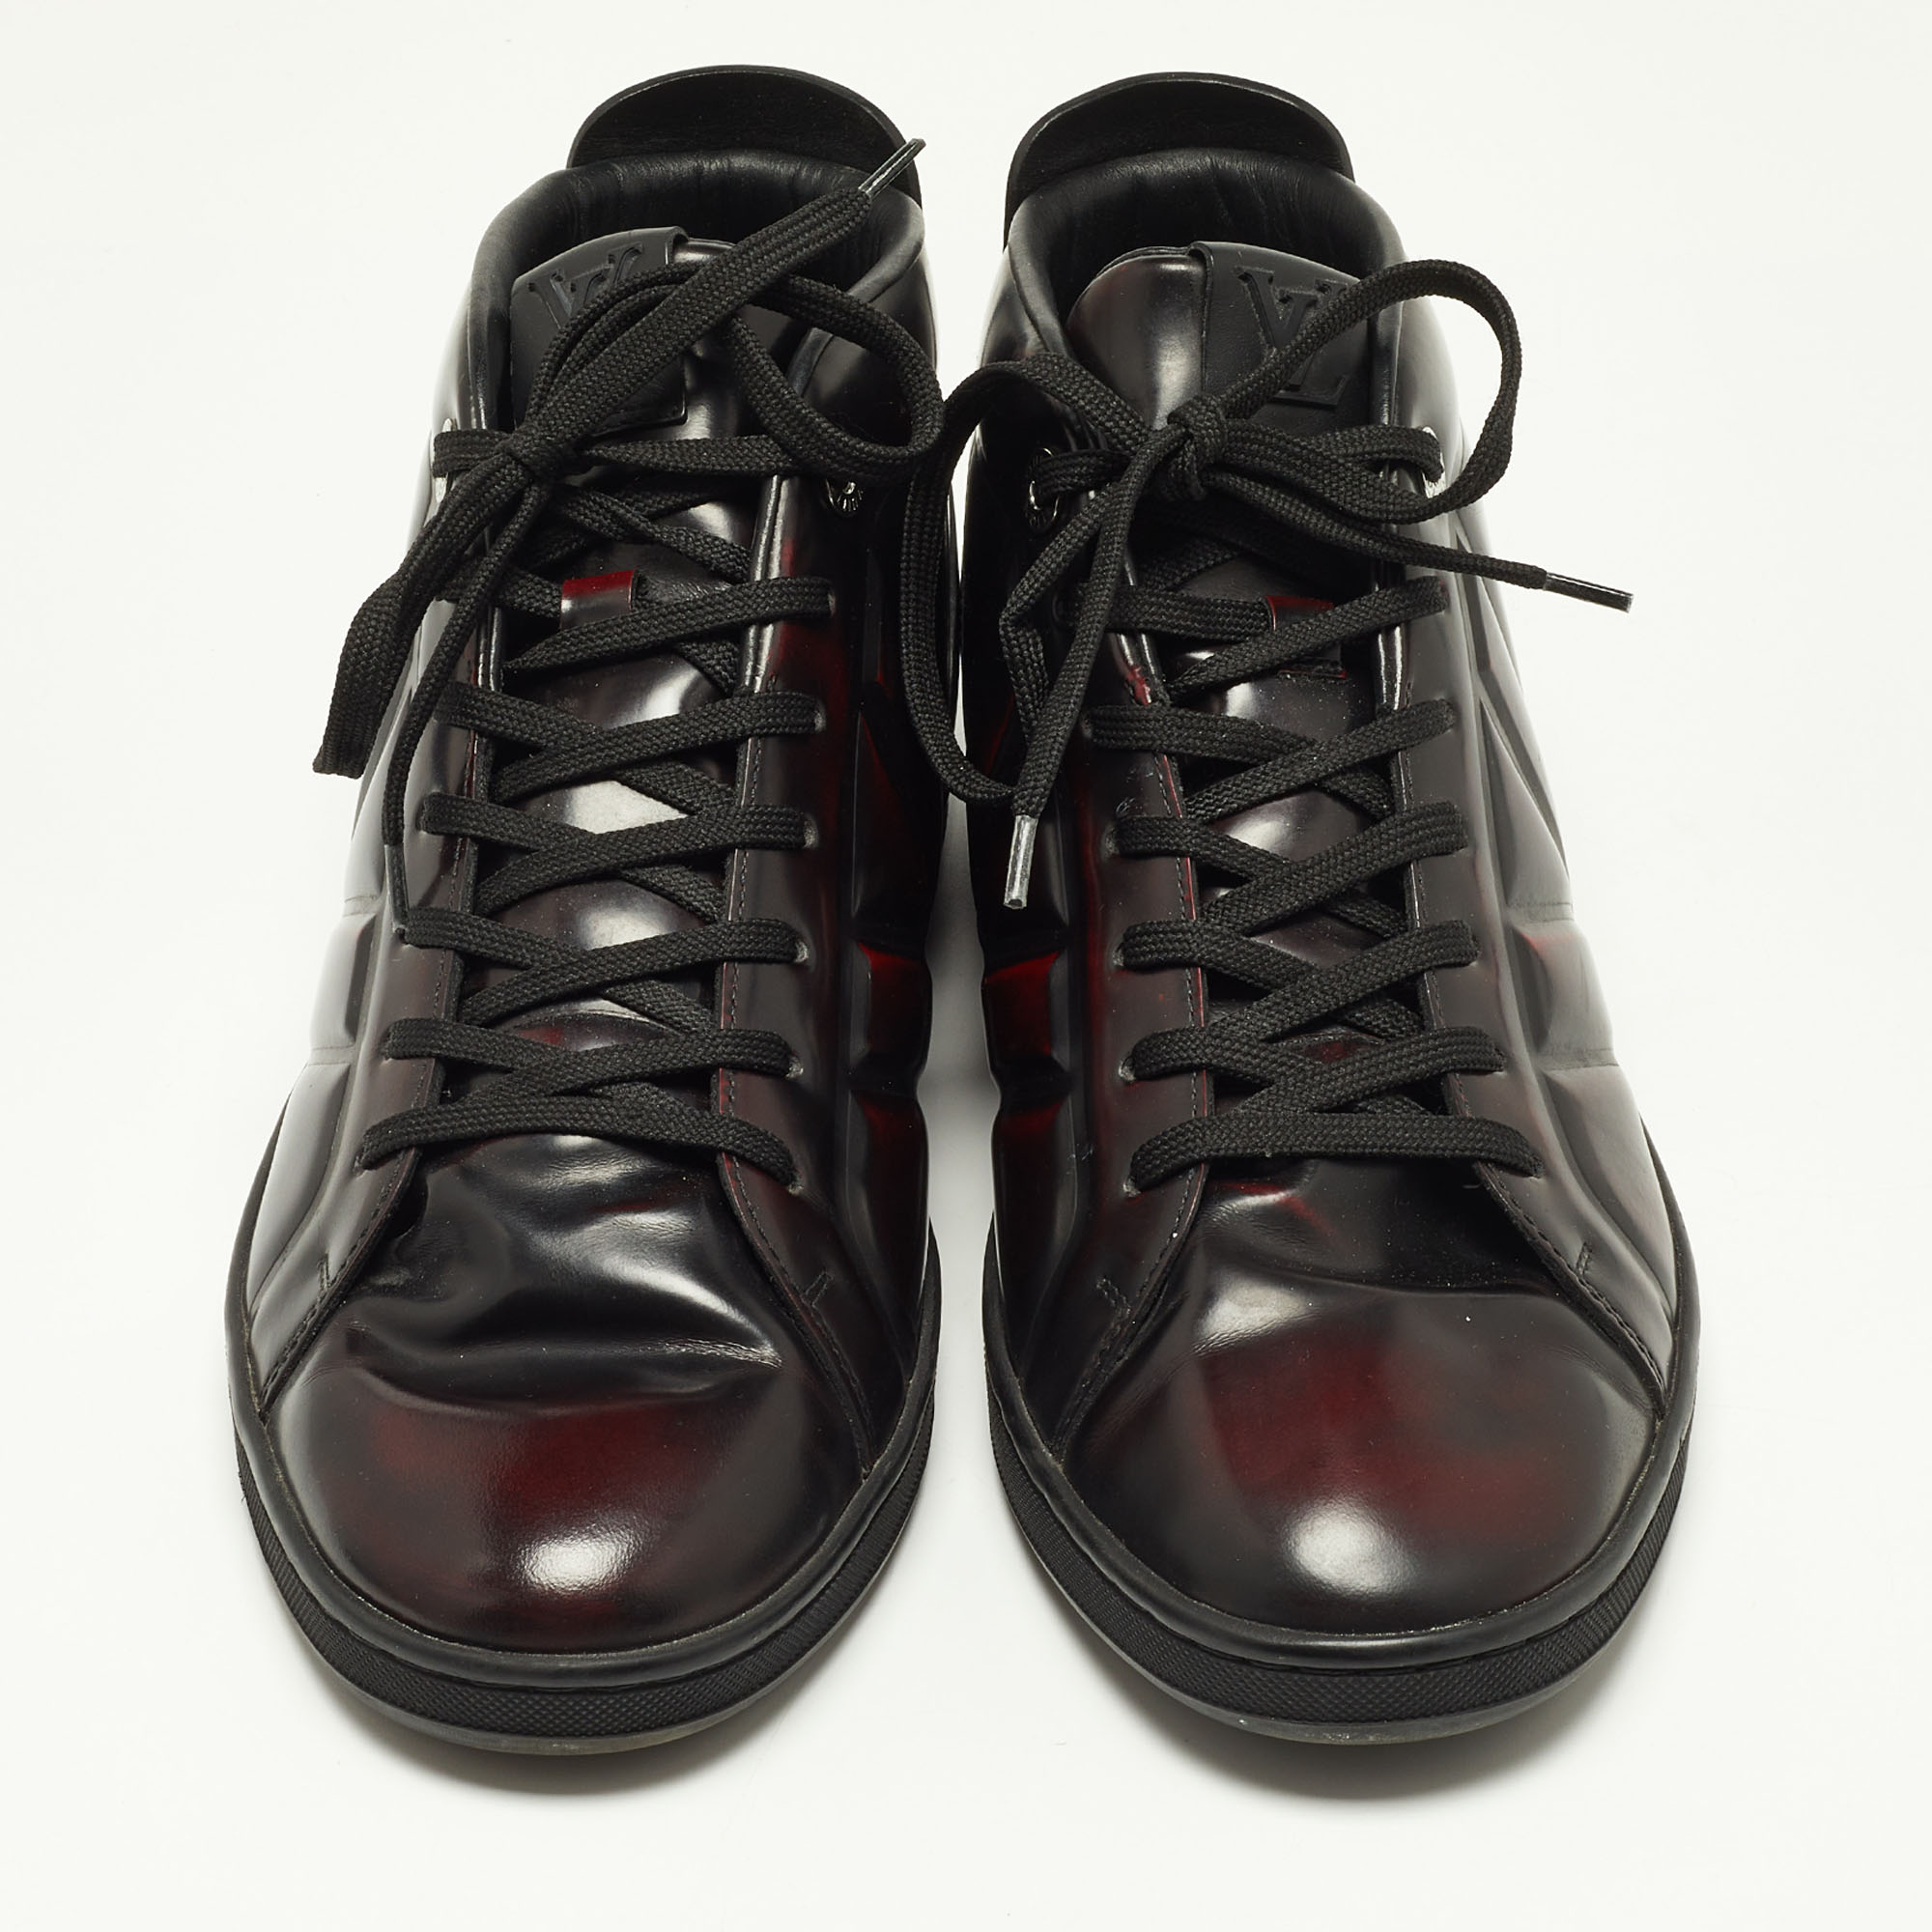 Louis Vuitton Two Tone Leather High Top Sneakers Size 42